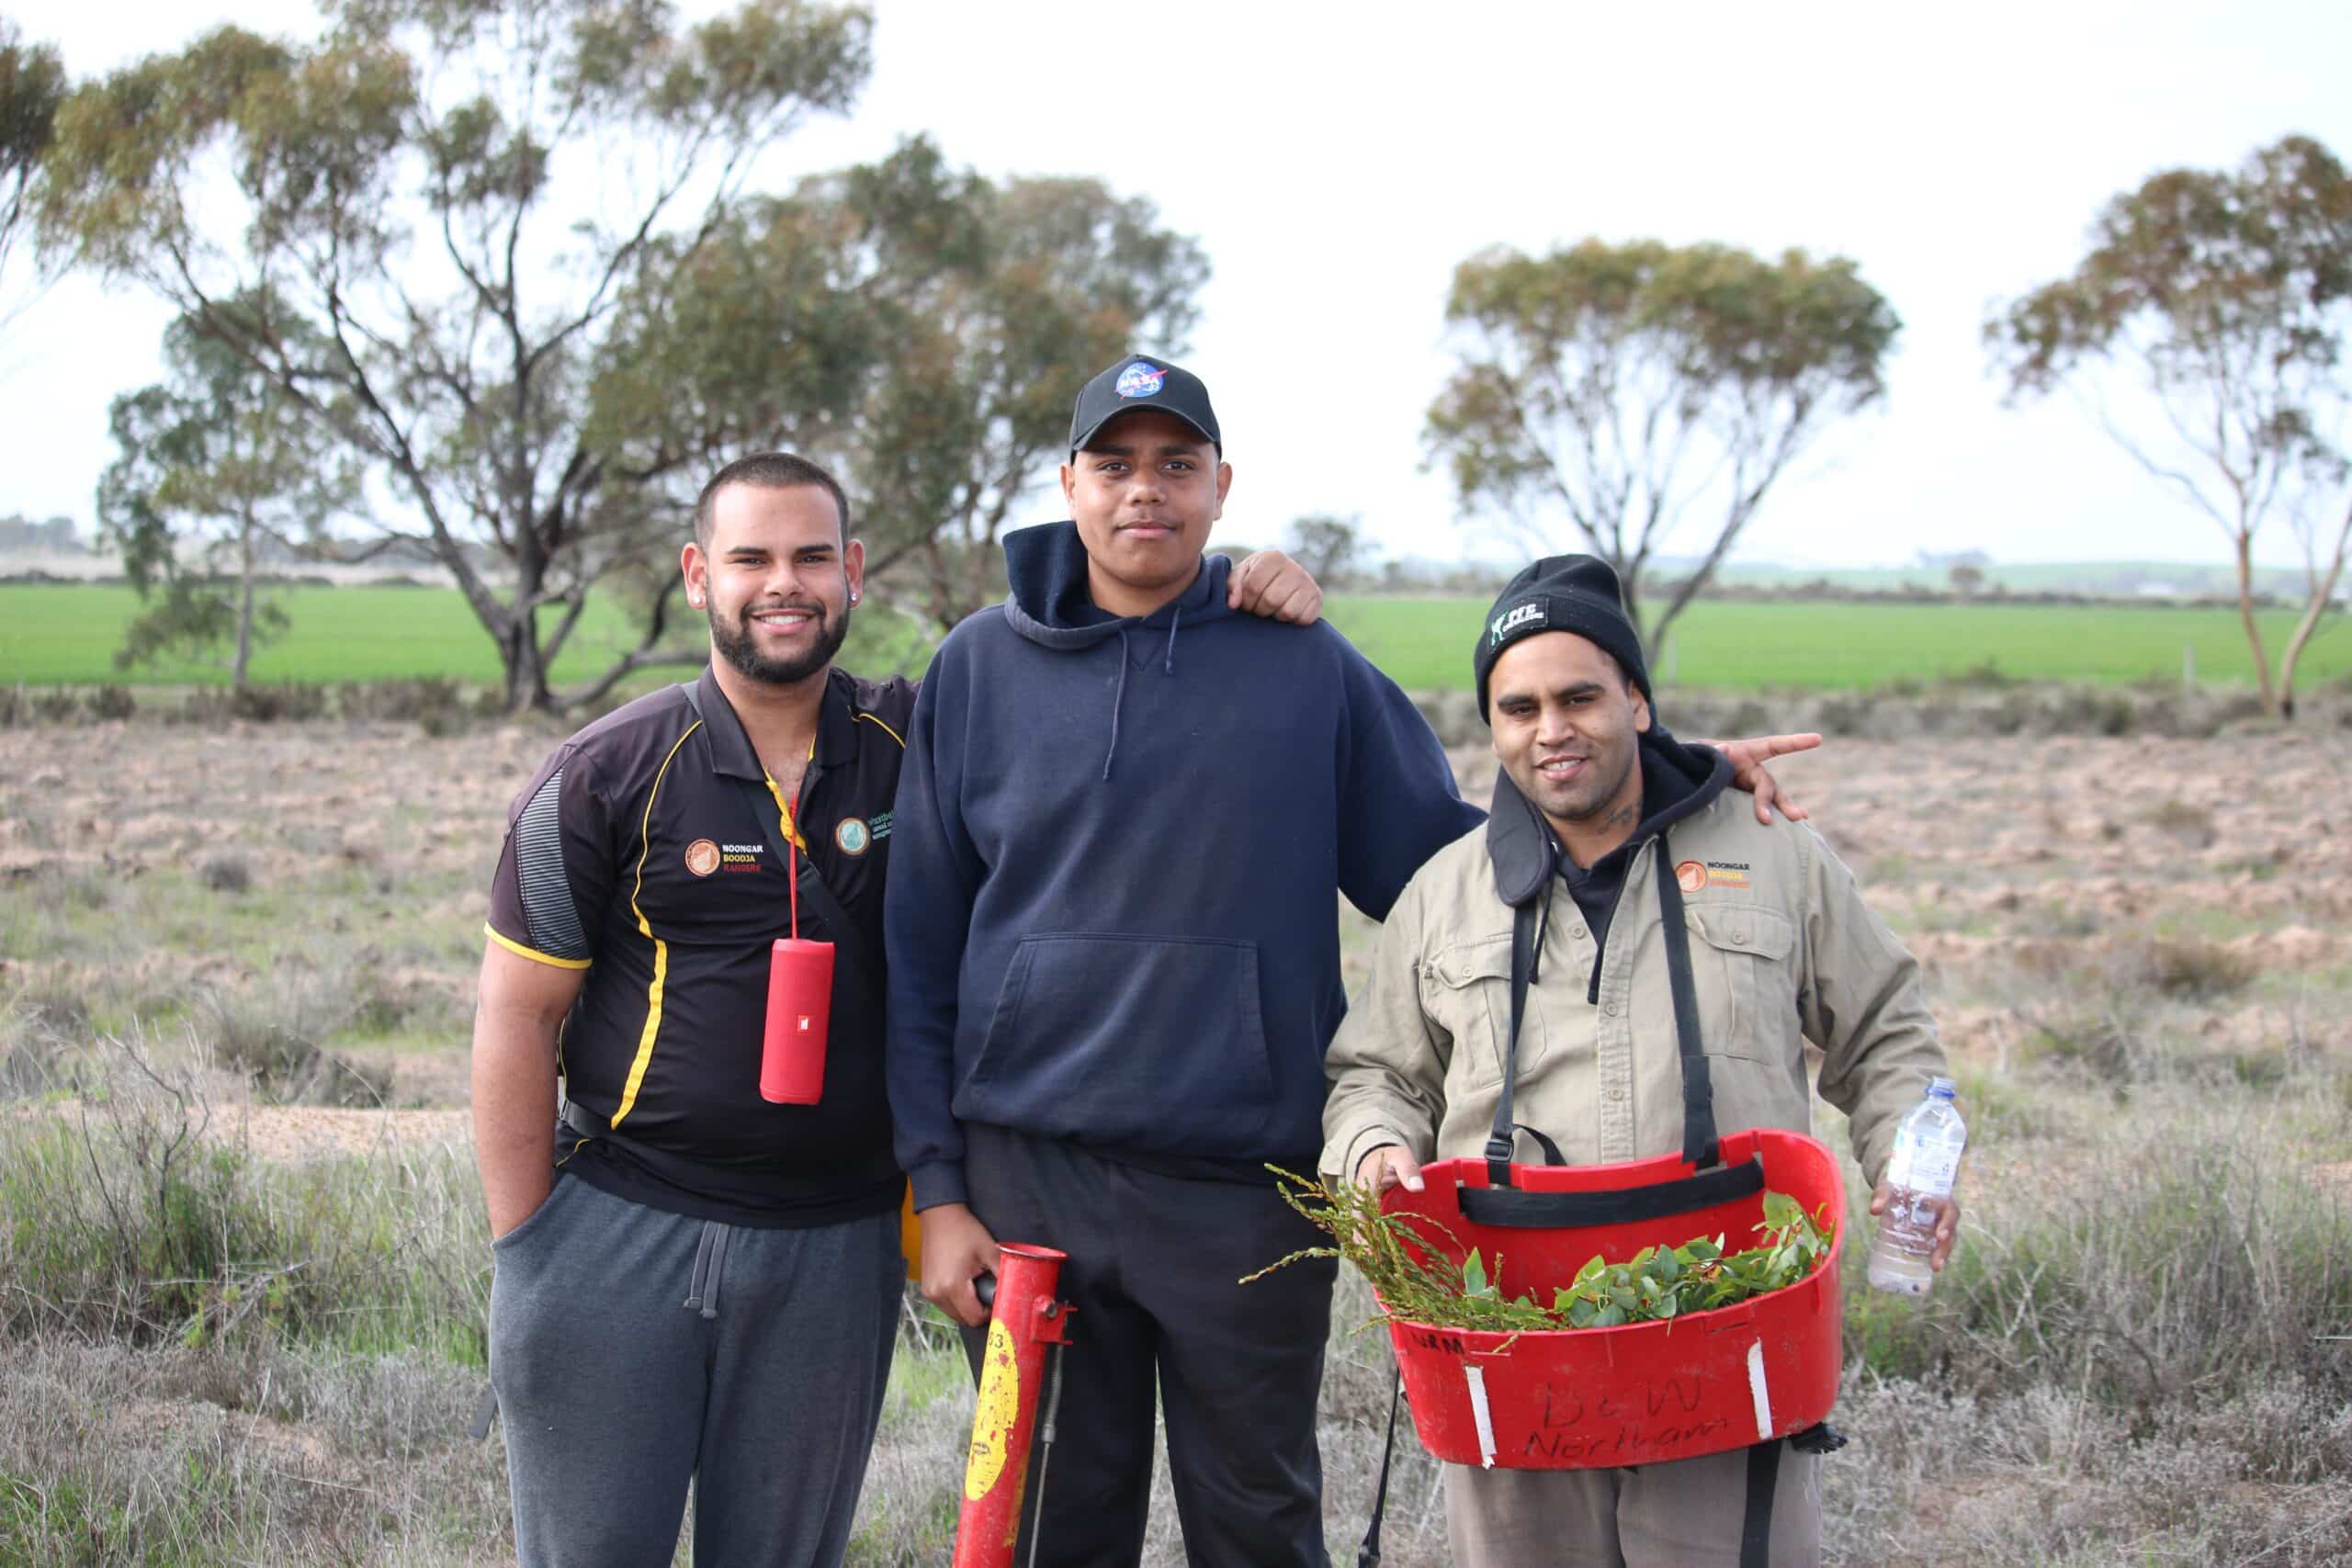 Three young men standing in a field. The man on the right is holding a red bucket full of seedlings.